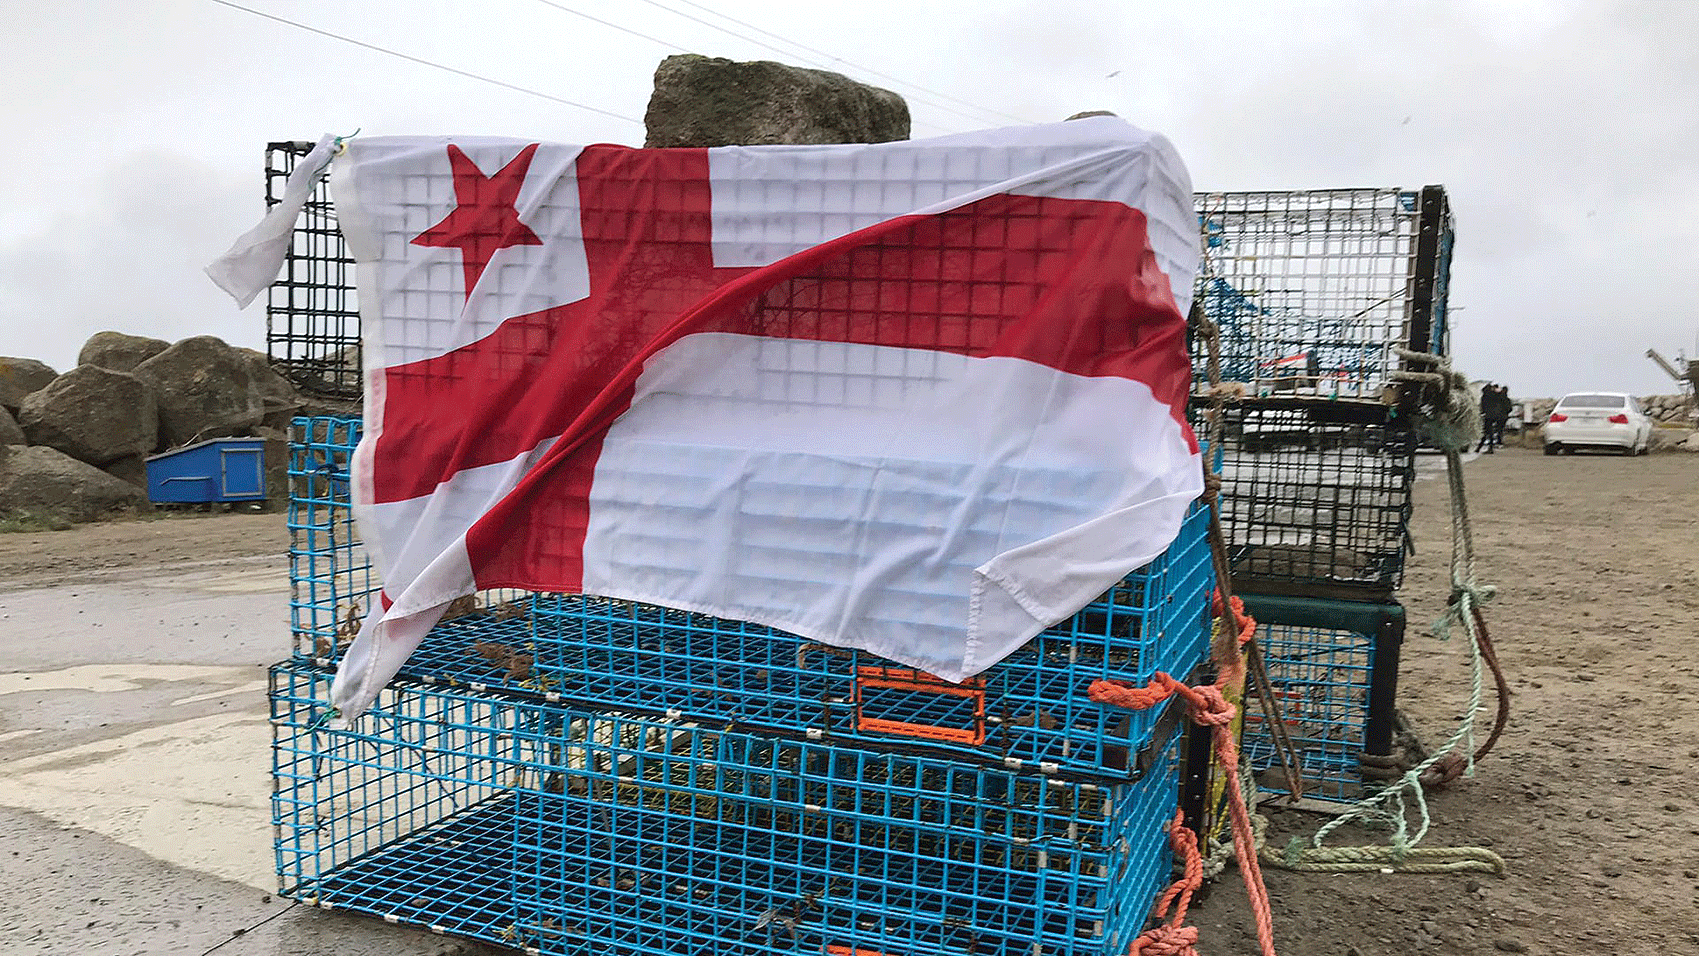 A Mi’kmaq First Nation flag draped over lobster traps in Nova Scotia. Photo: Angel Moore / courtesy APTN